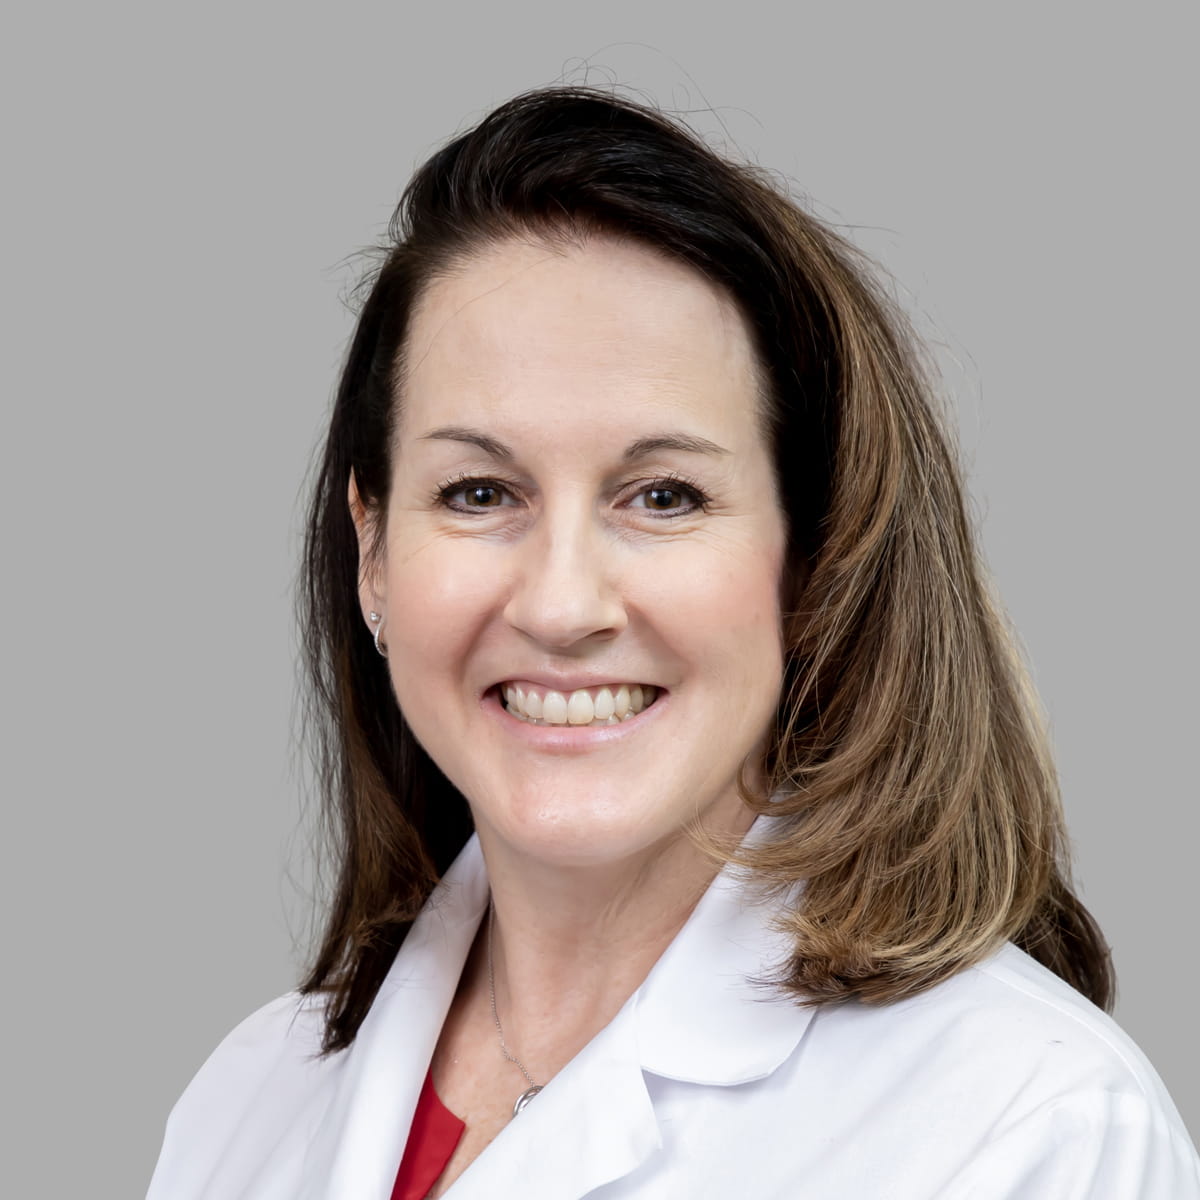 A friendly image of Natalie Witte MD